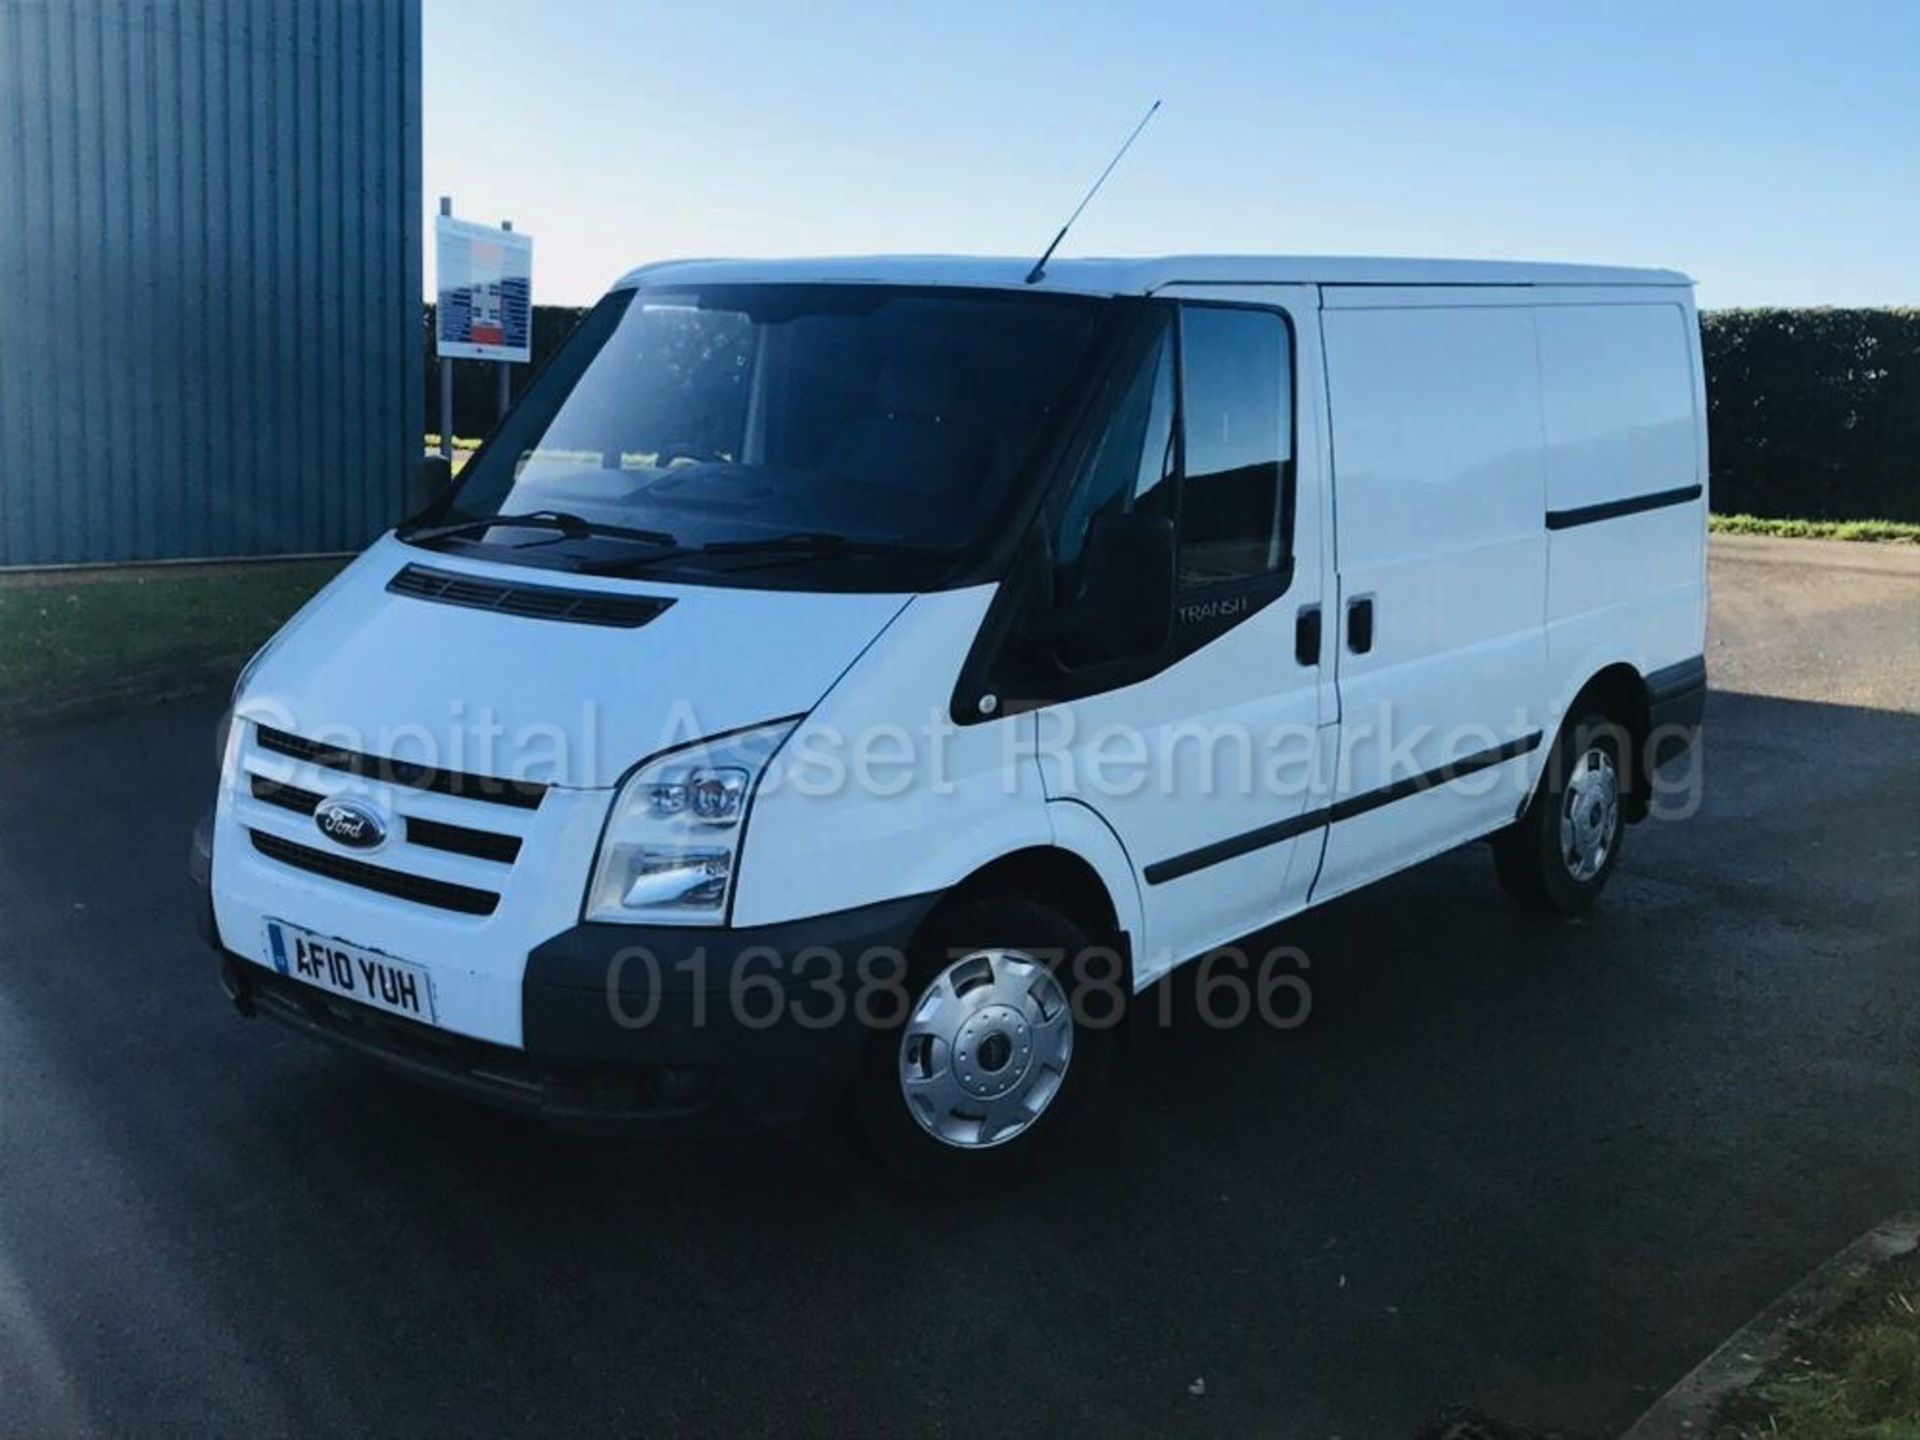 FORD TRANSIT 115 T280 SWB 'TREND' (2010) '2.2 TDCI - 115 PS - 6 SPEED' *AIR CON - CRUISE* (NO VAT) - Image 3 of 25